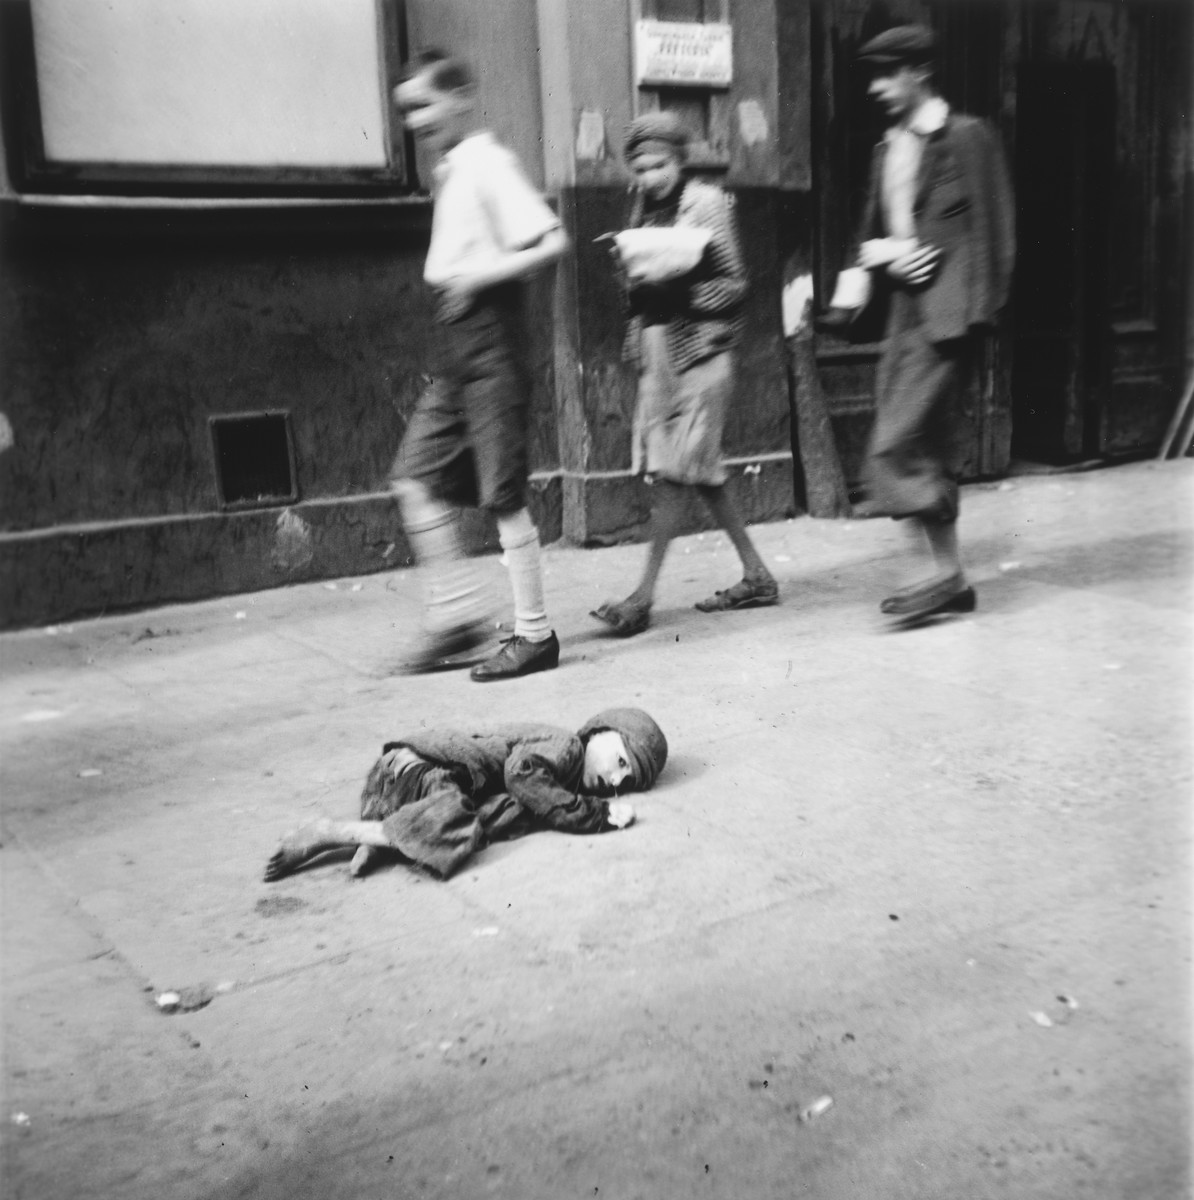 A destitute young boy lies on the pavement in the Warsaw ghetto as other children walk by.

Joest's original caption reads: "On a sidewalk in a side street I saw this tiny child who could no longer pull himself upright.  The passers-by didn't stop.  There were too many children like this one."